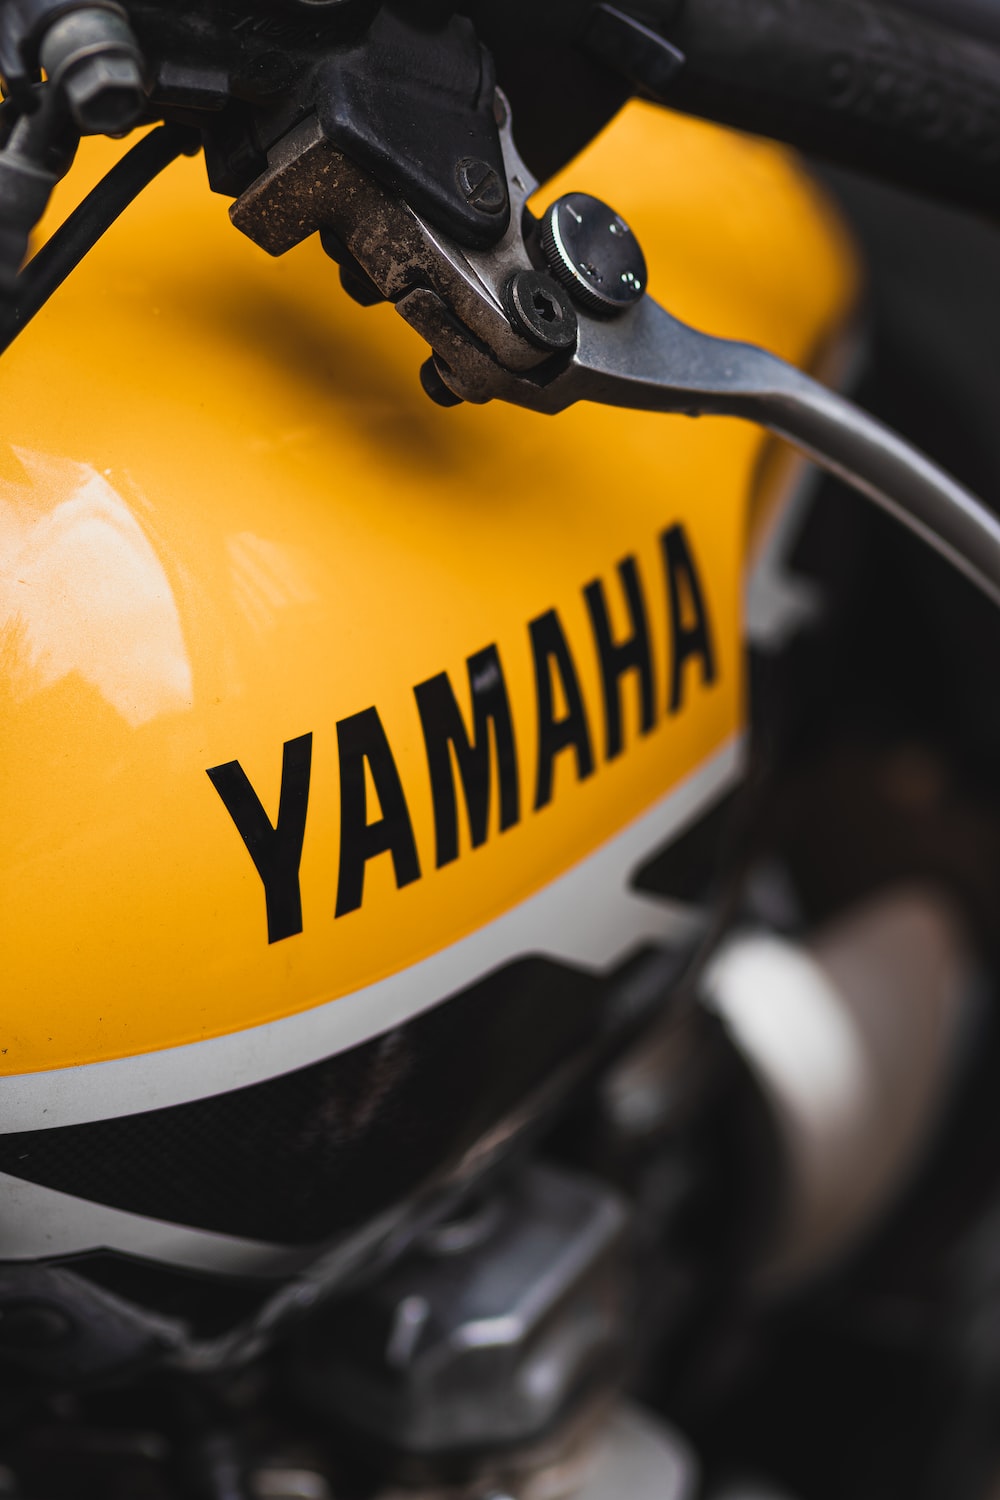 Yamaha pictures download free images on